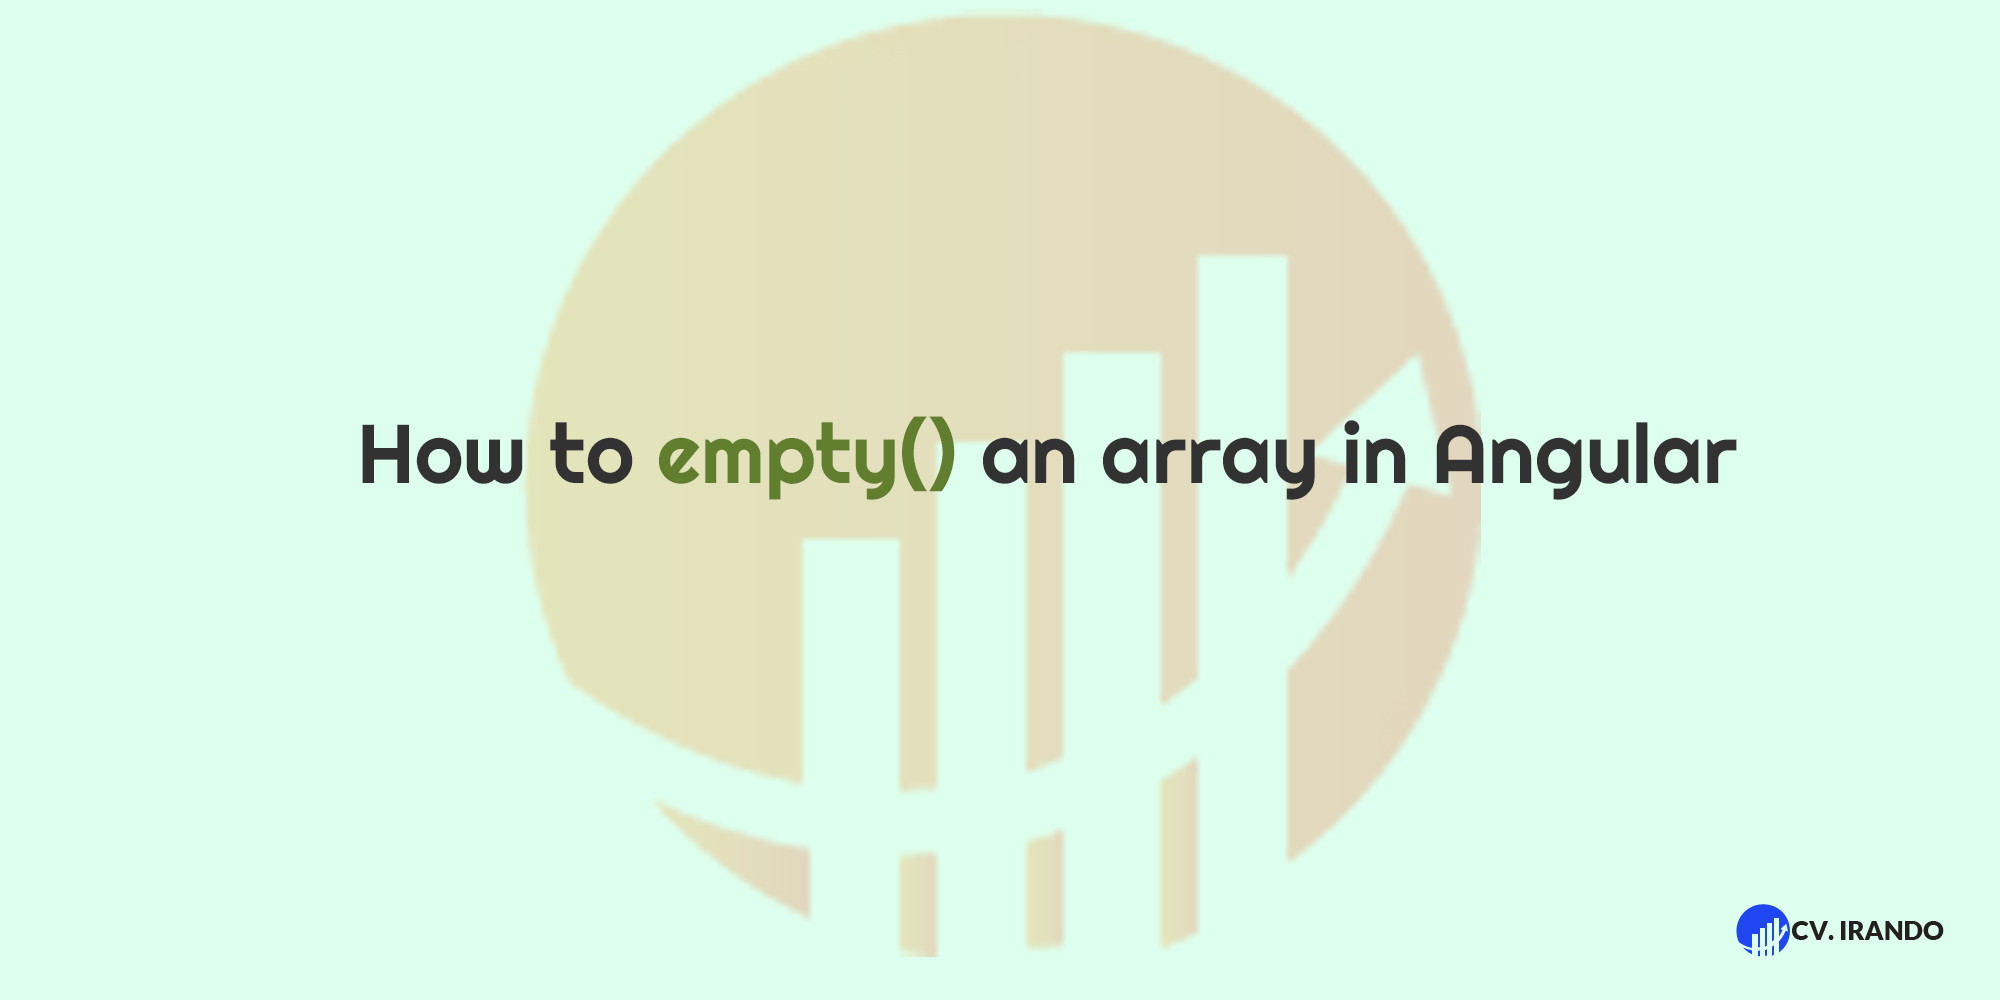 How to empty an array in angular